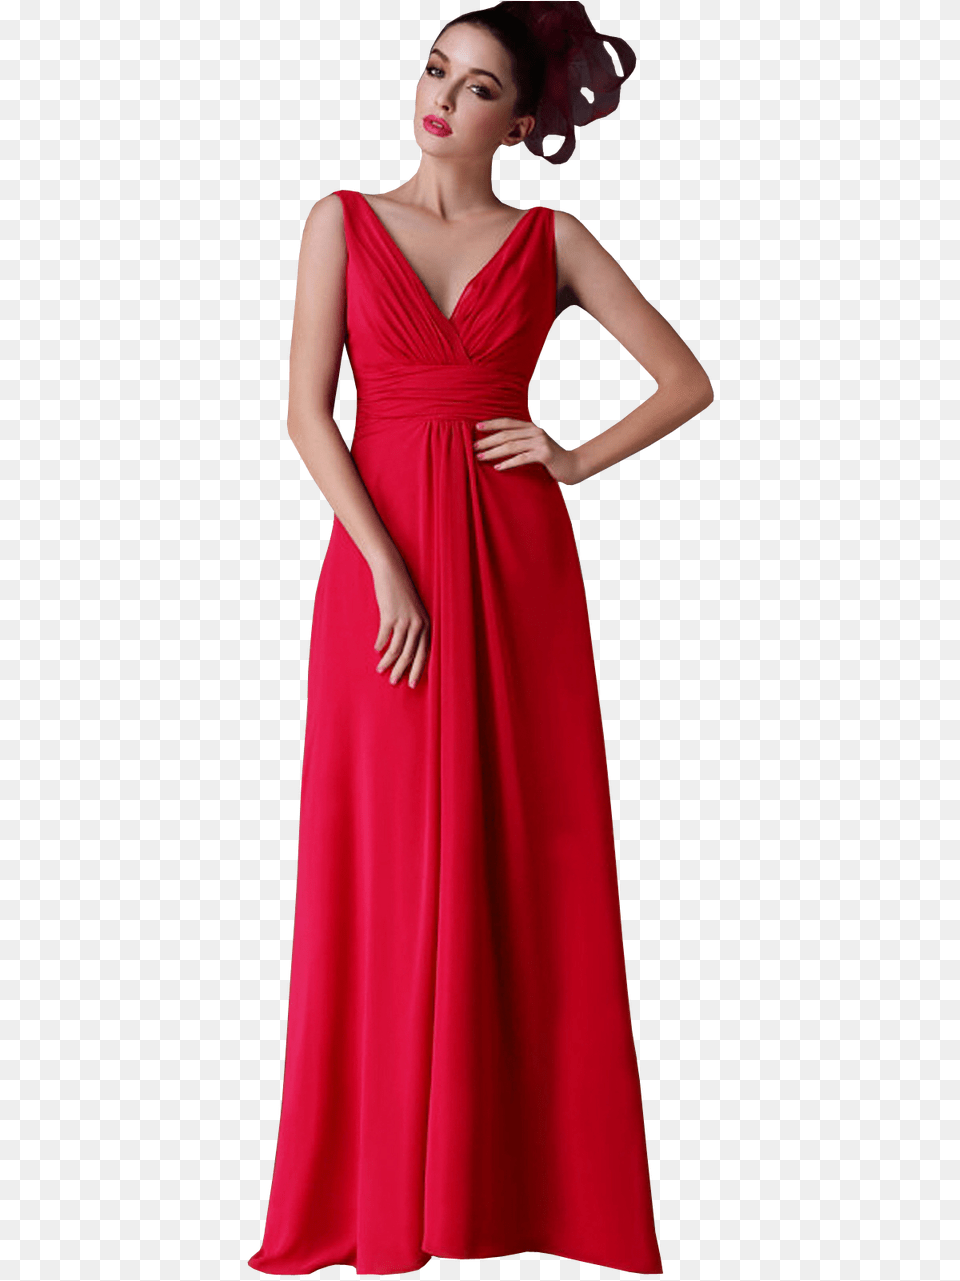 New V Neck Chiffon Party Prom Dress Gown, Adult, Person, Formal Wear, Female Free Transparent Png